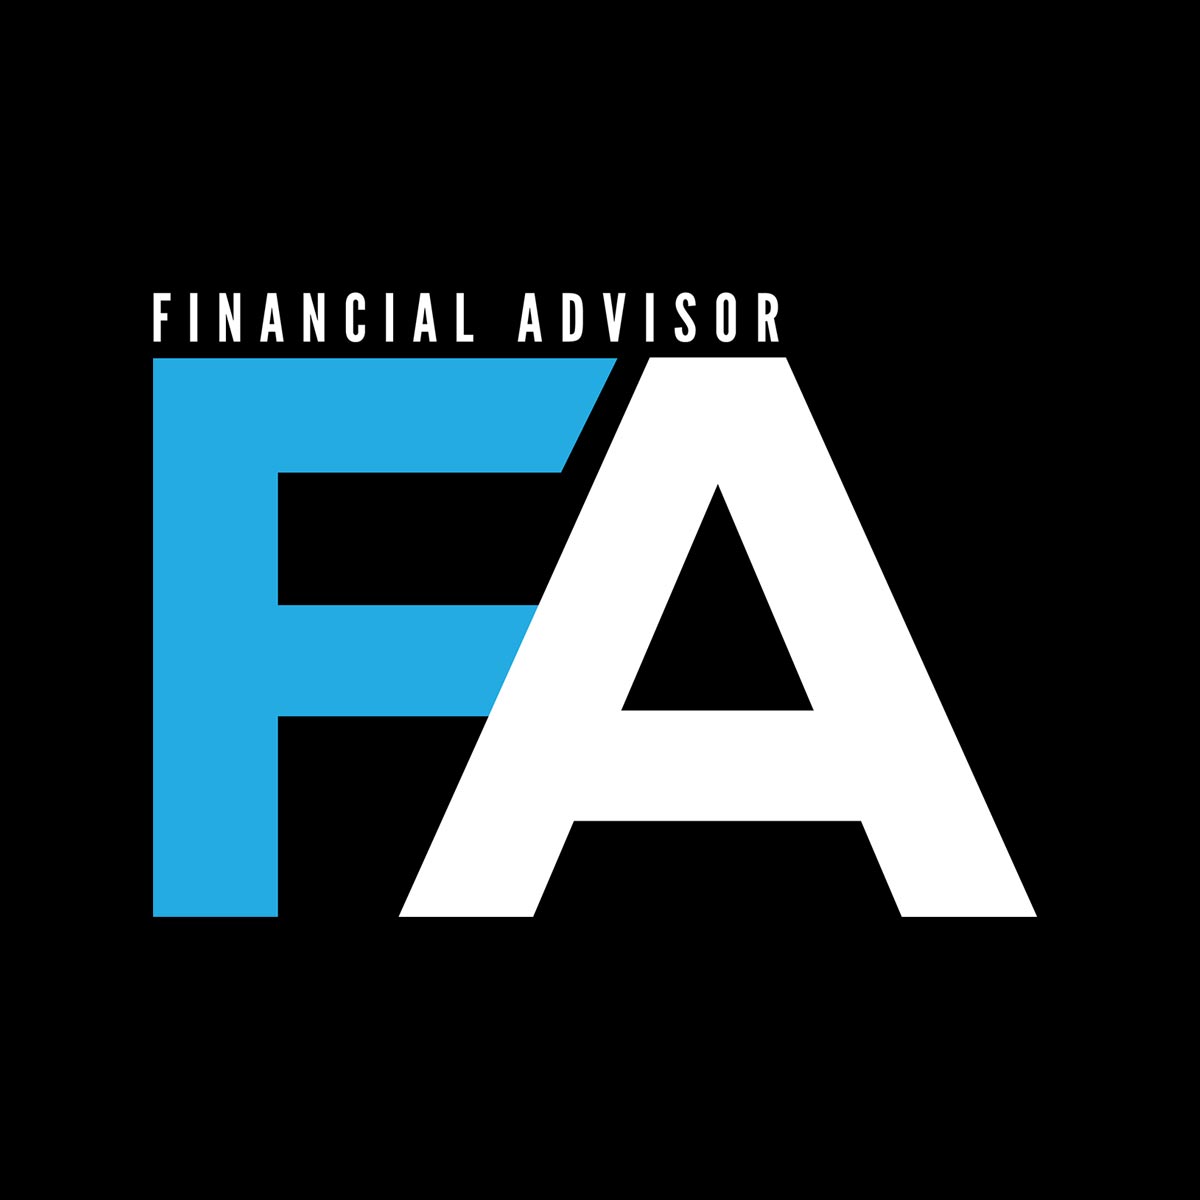 Online News for Financial Advisors, RIAs, Investment Advisors, Financial Planners & Wealth Managers